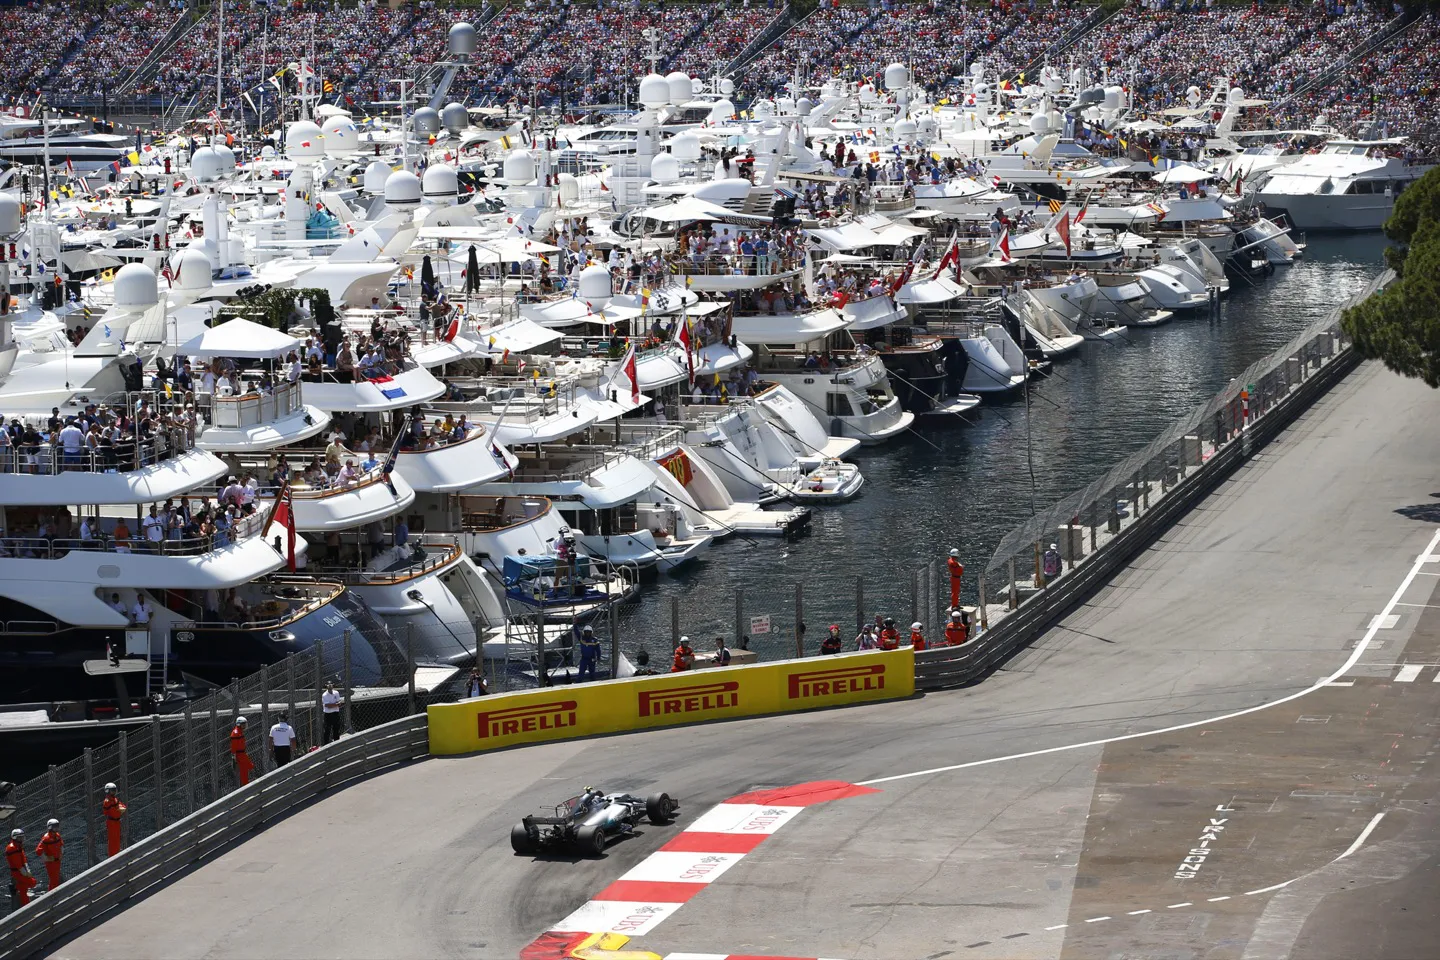 F1 cars drive past guests aboard superyachts in Monaco for this iconic F1 Grand Prix